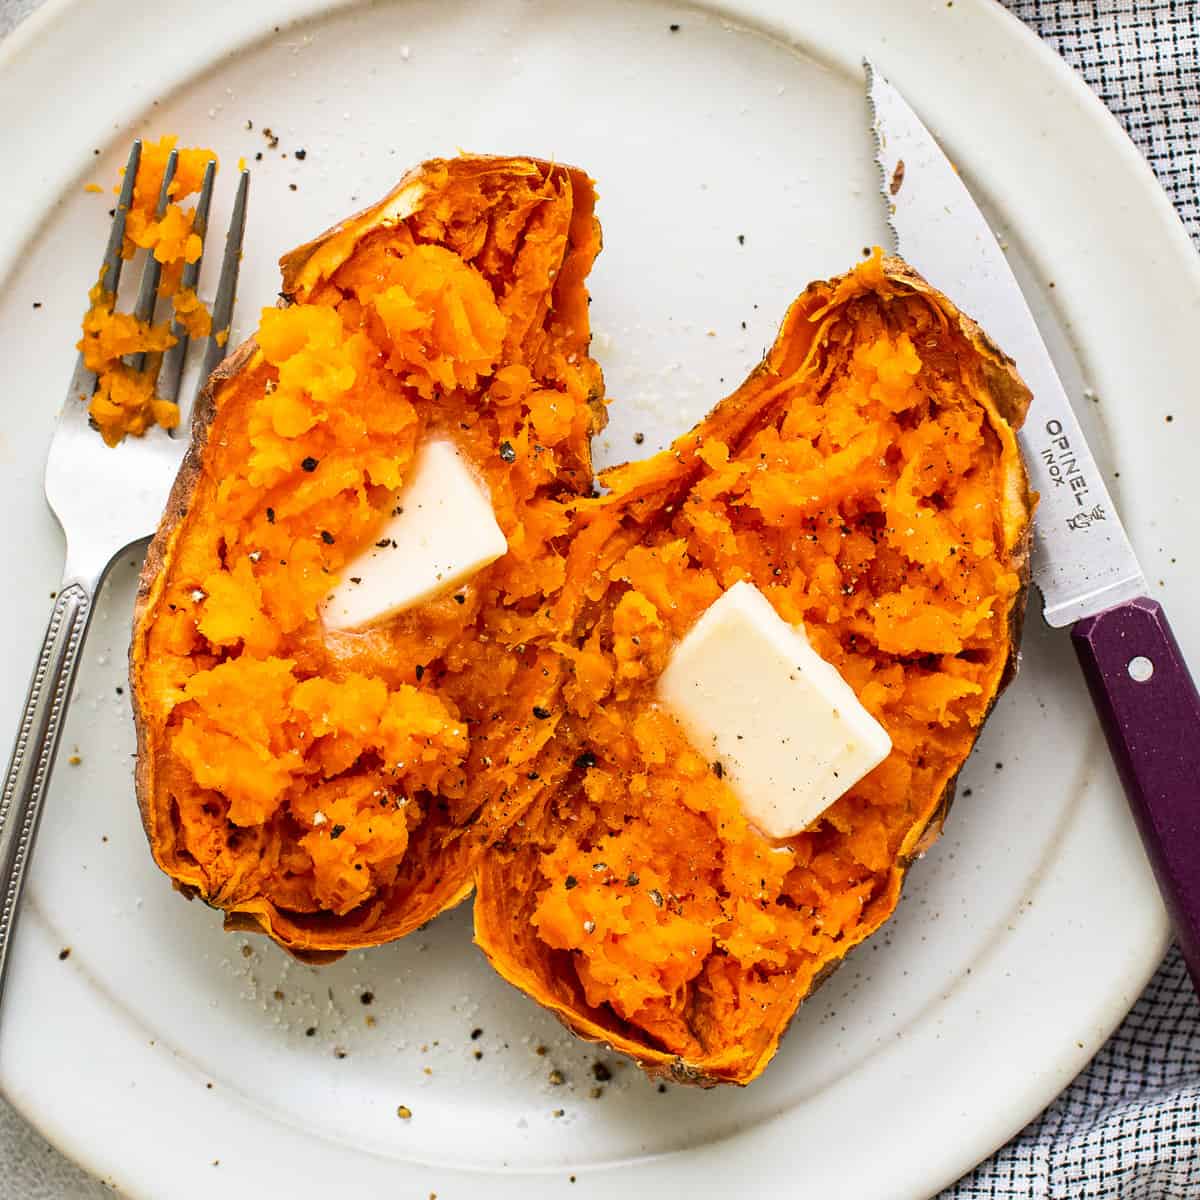 How to Microwave a Sweet Potato - Fit Foodie Finds